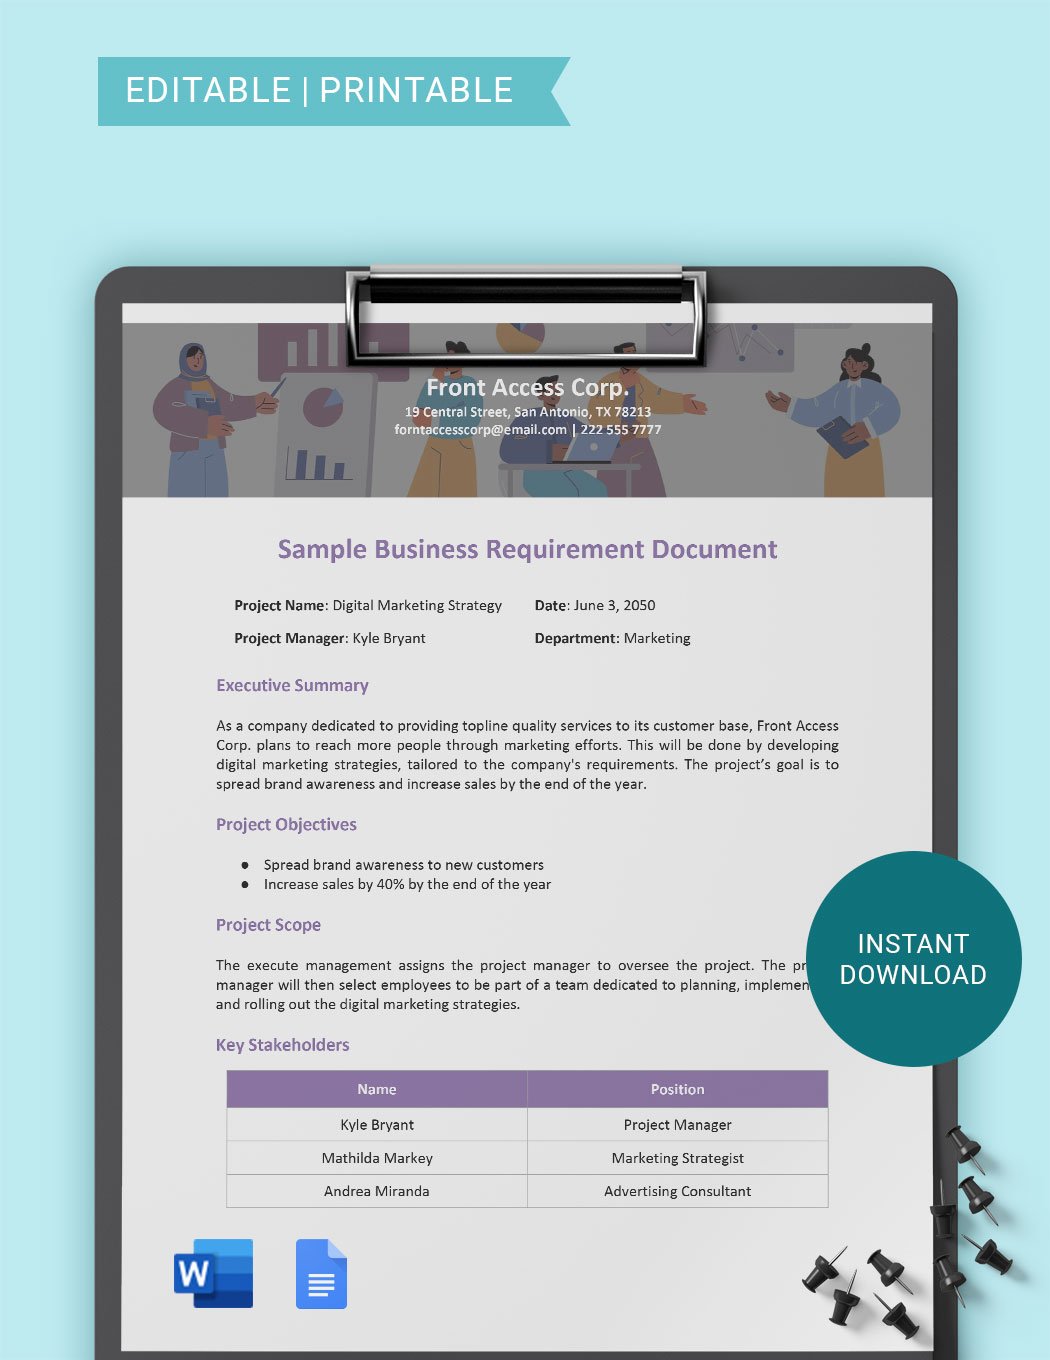 Sample Business Requirements Document Template in Word, Google Docs